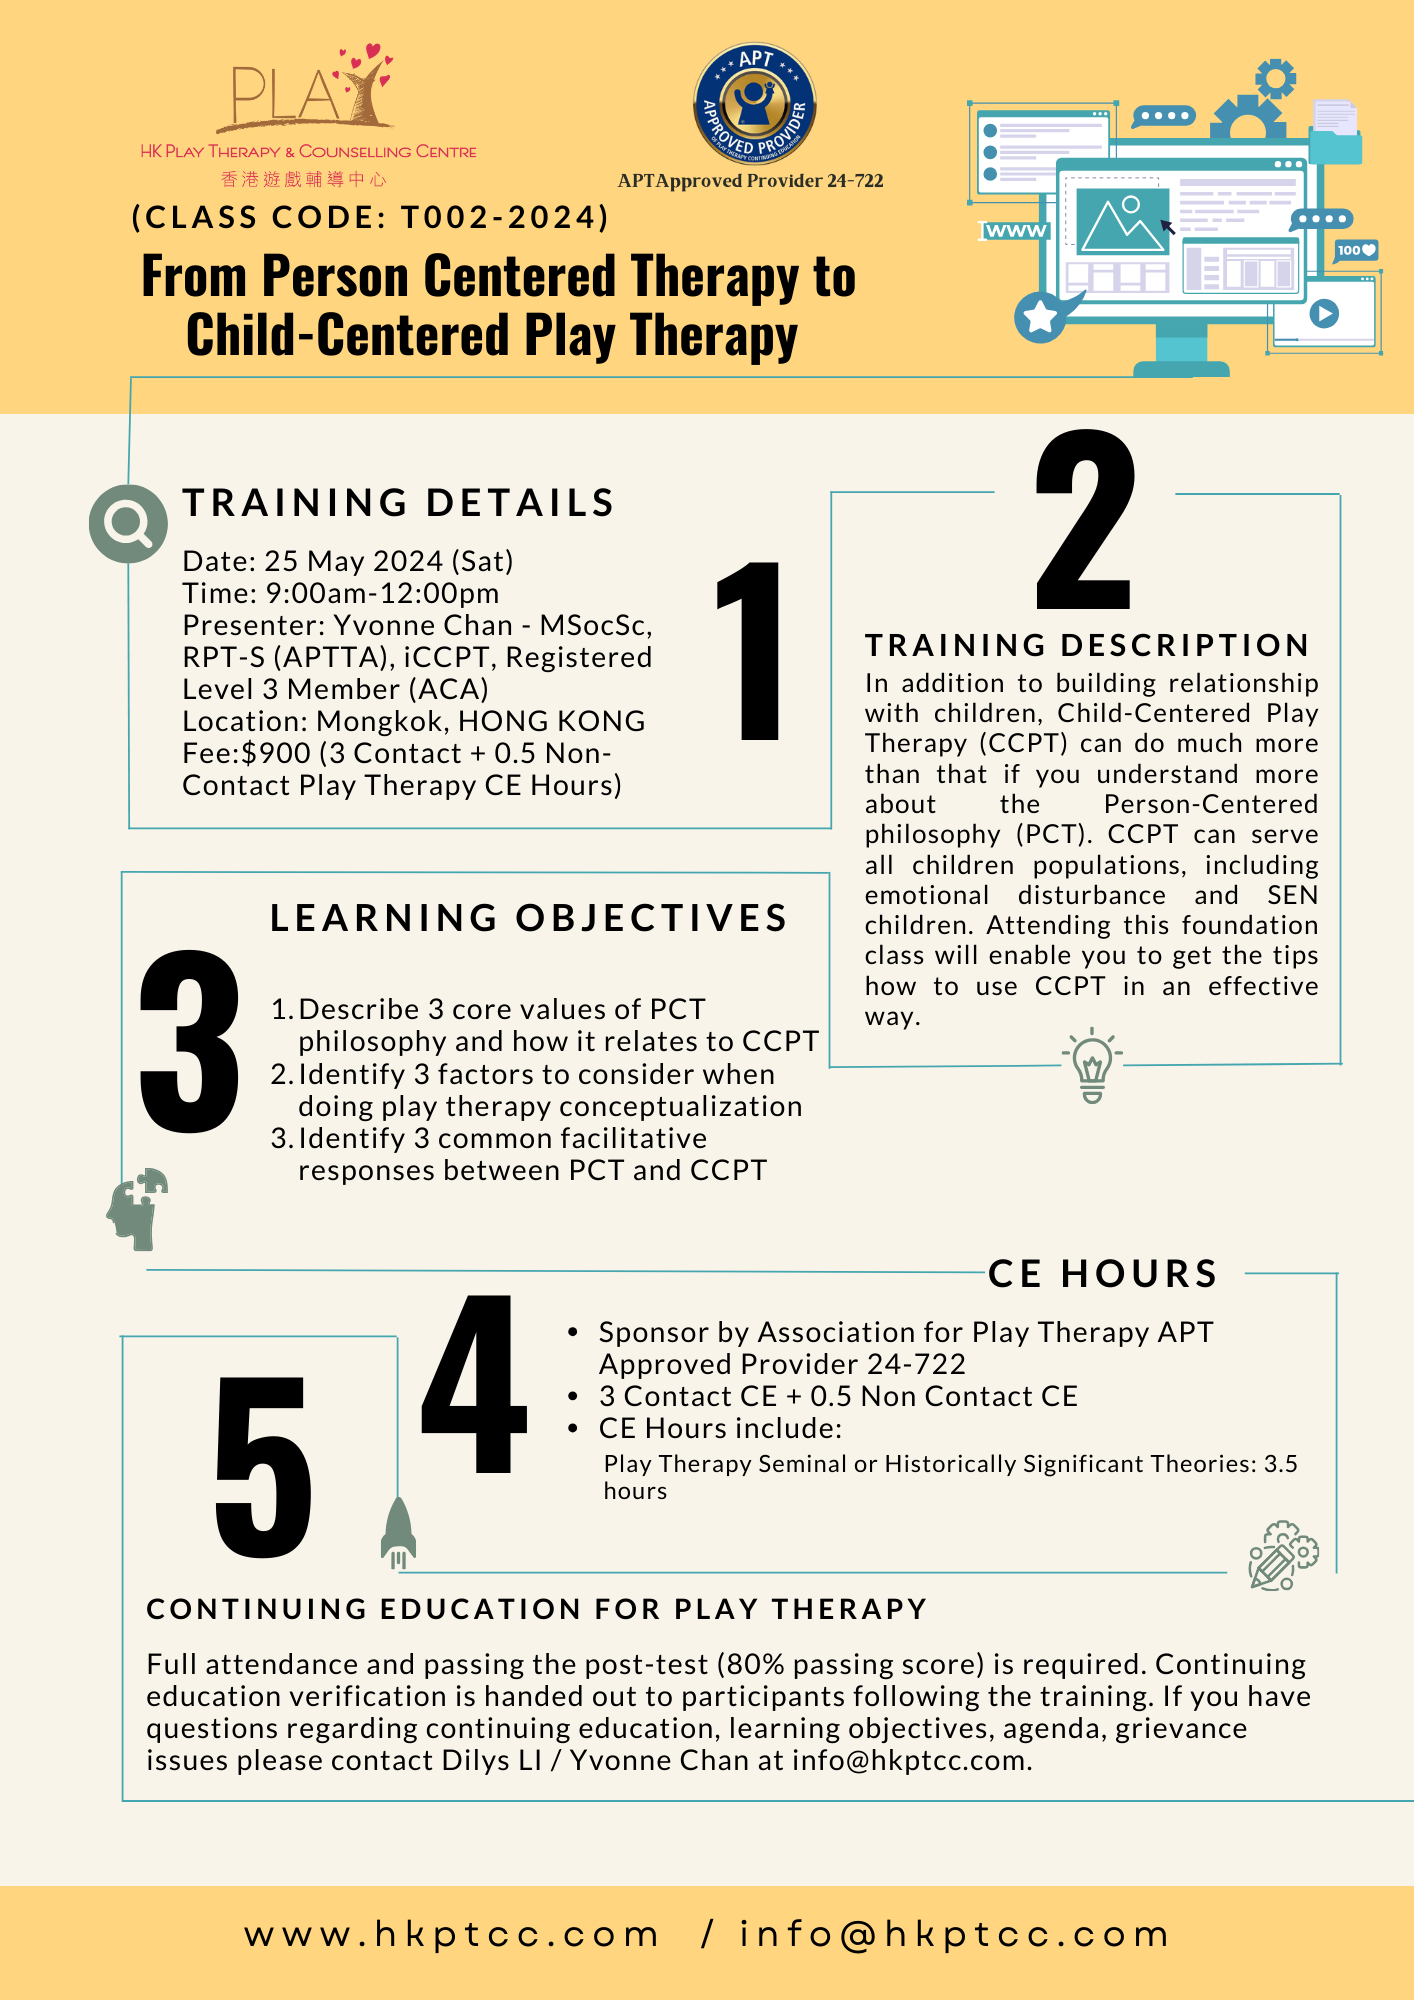 From Person Centered Therapy to Child-Centered Play Therapy